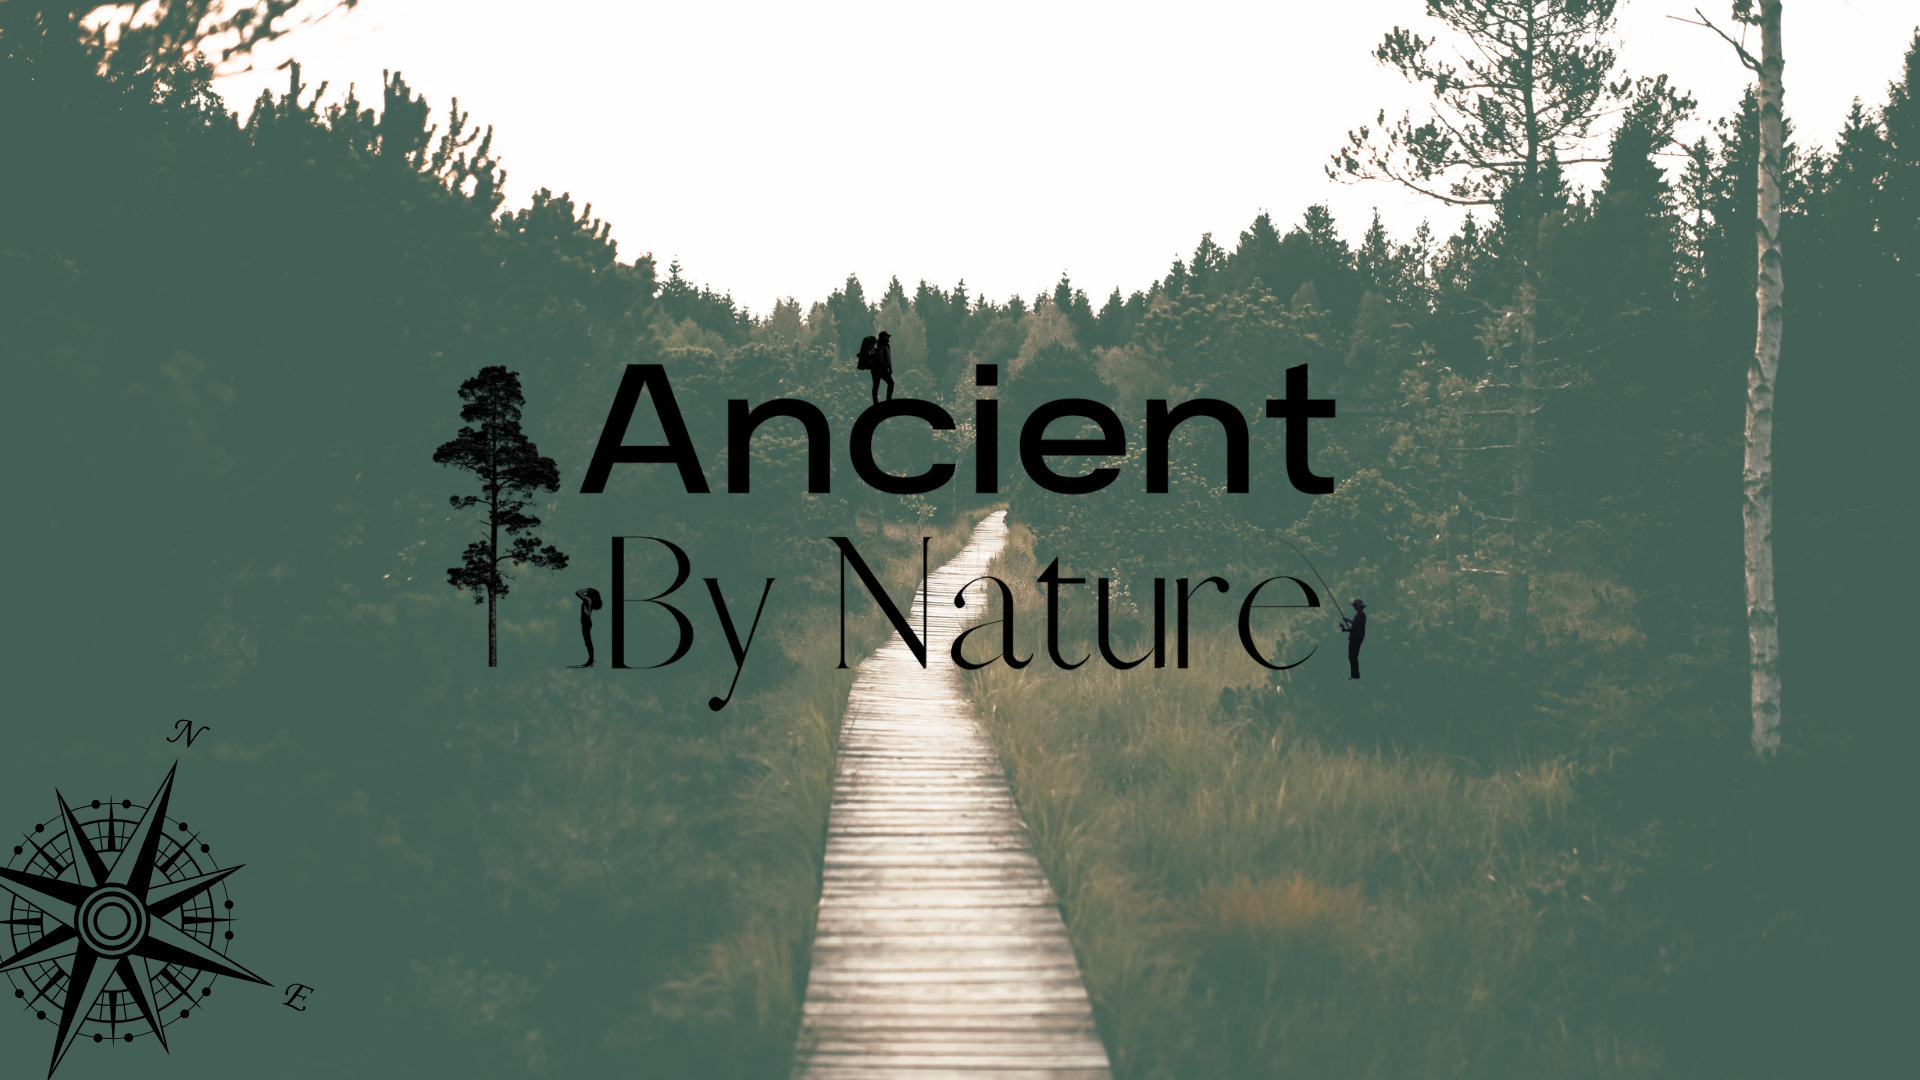 Load video: Ancient By Nature is a brand for everyone to enjoy. We came from it, we adapted to it, we belong to it. Let&#39;s get back in touch with it. Ancient By Nature - It&#39;s In All Of Us.